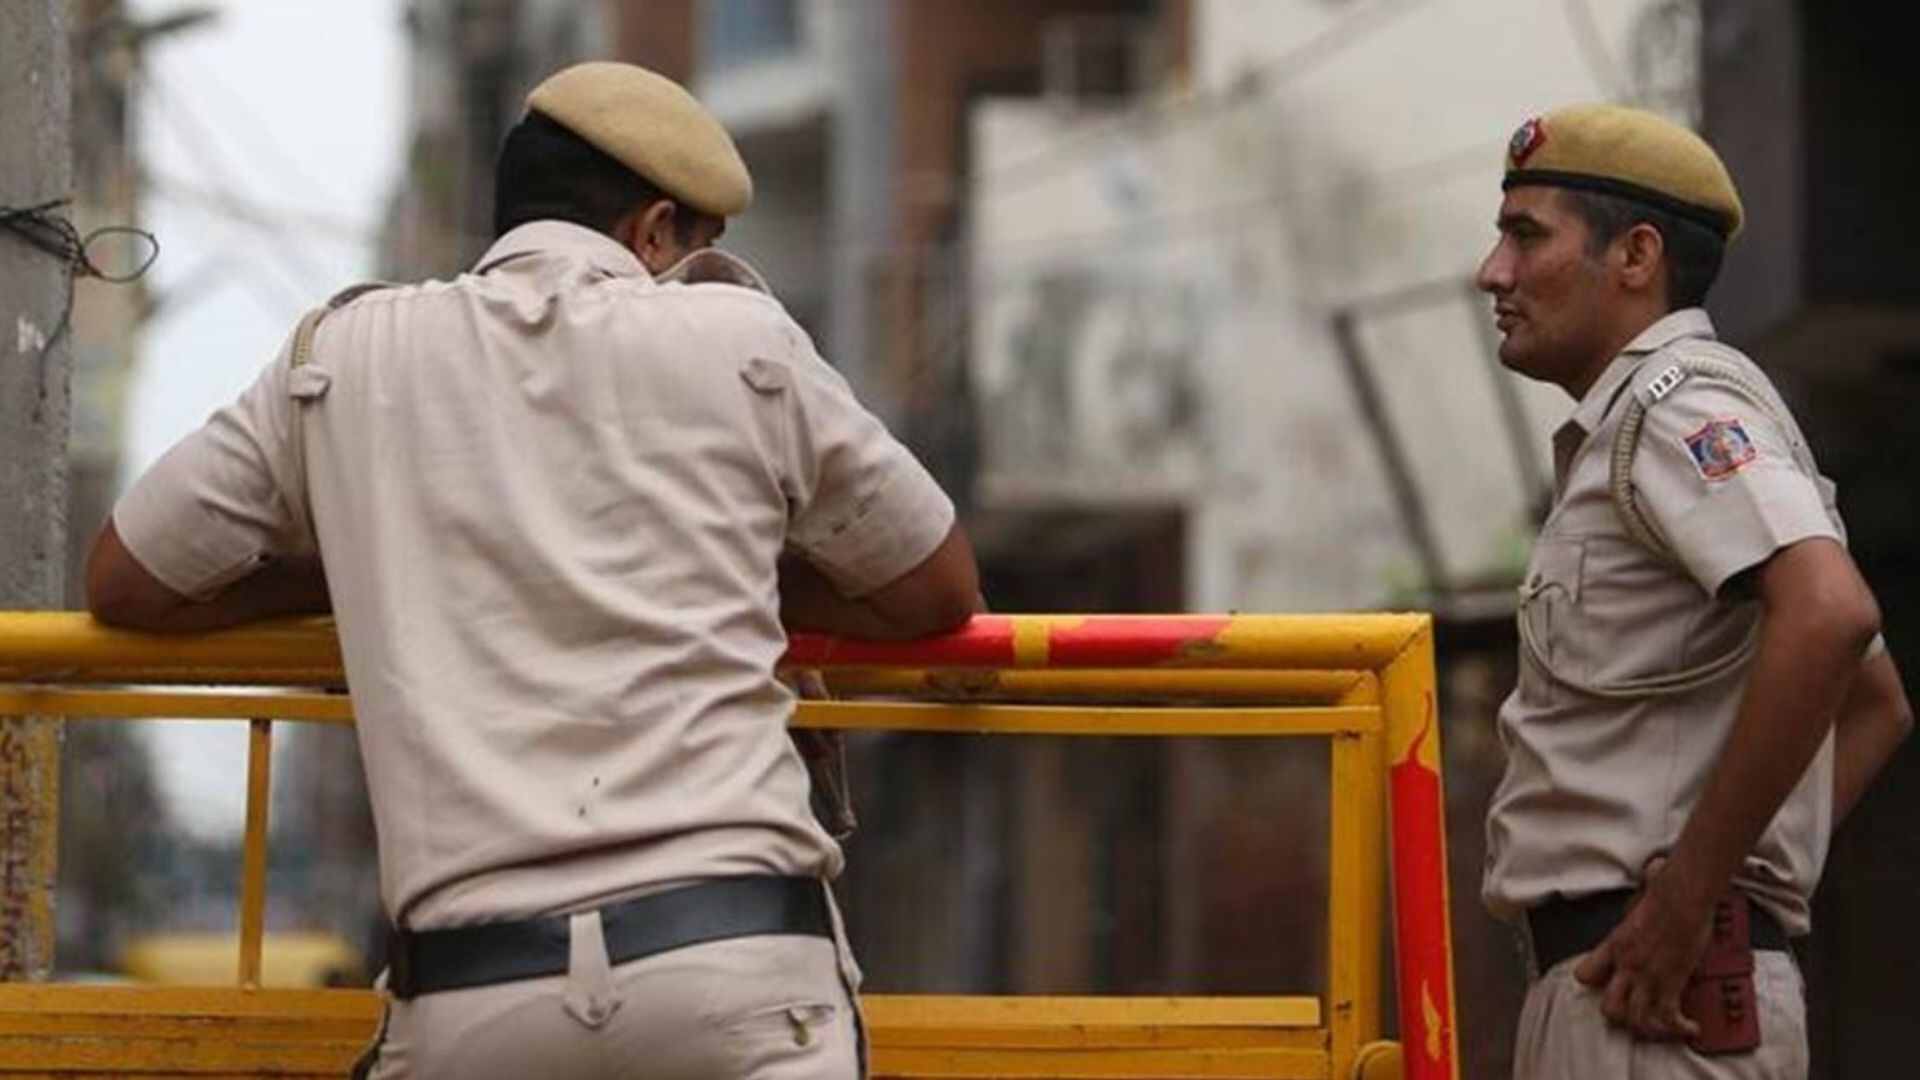 Cargo Pants And T-Shirts: Is Delhi Police Uniform About To Get A Makeover?